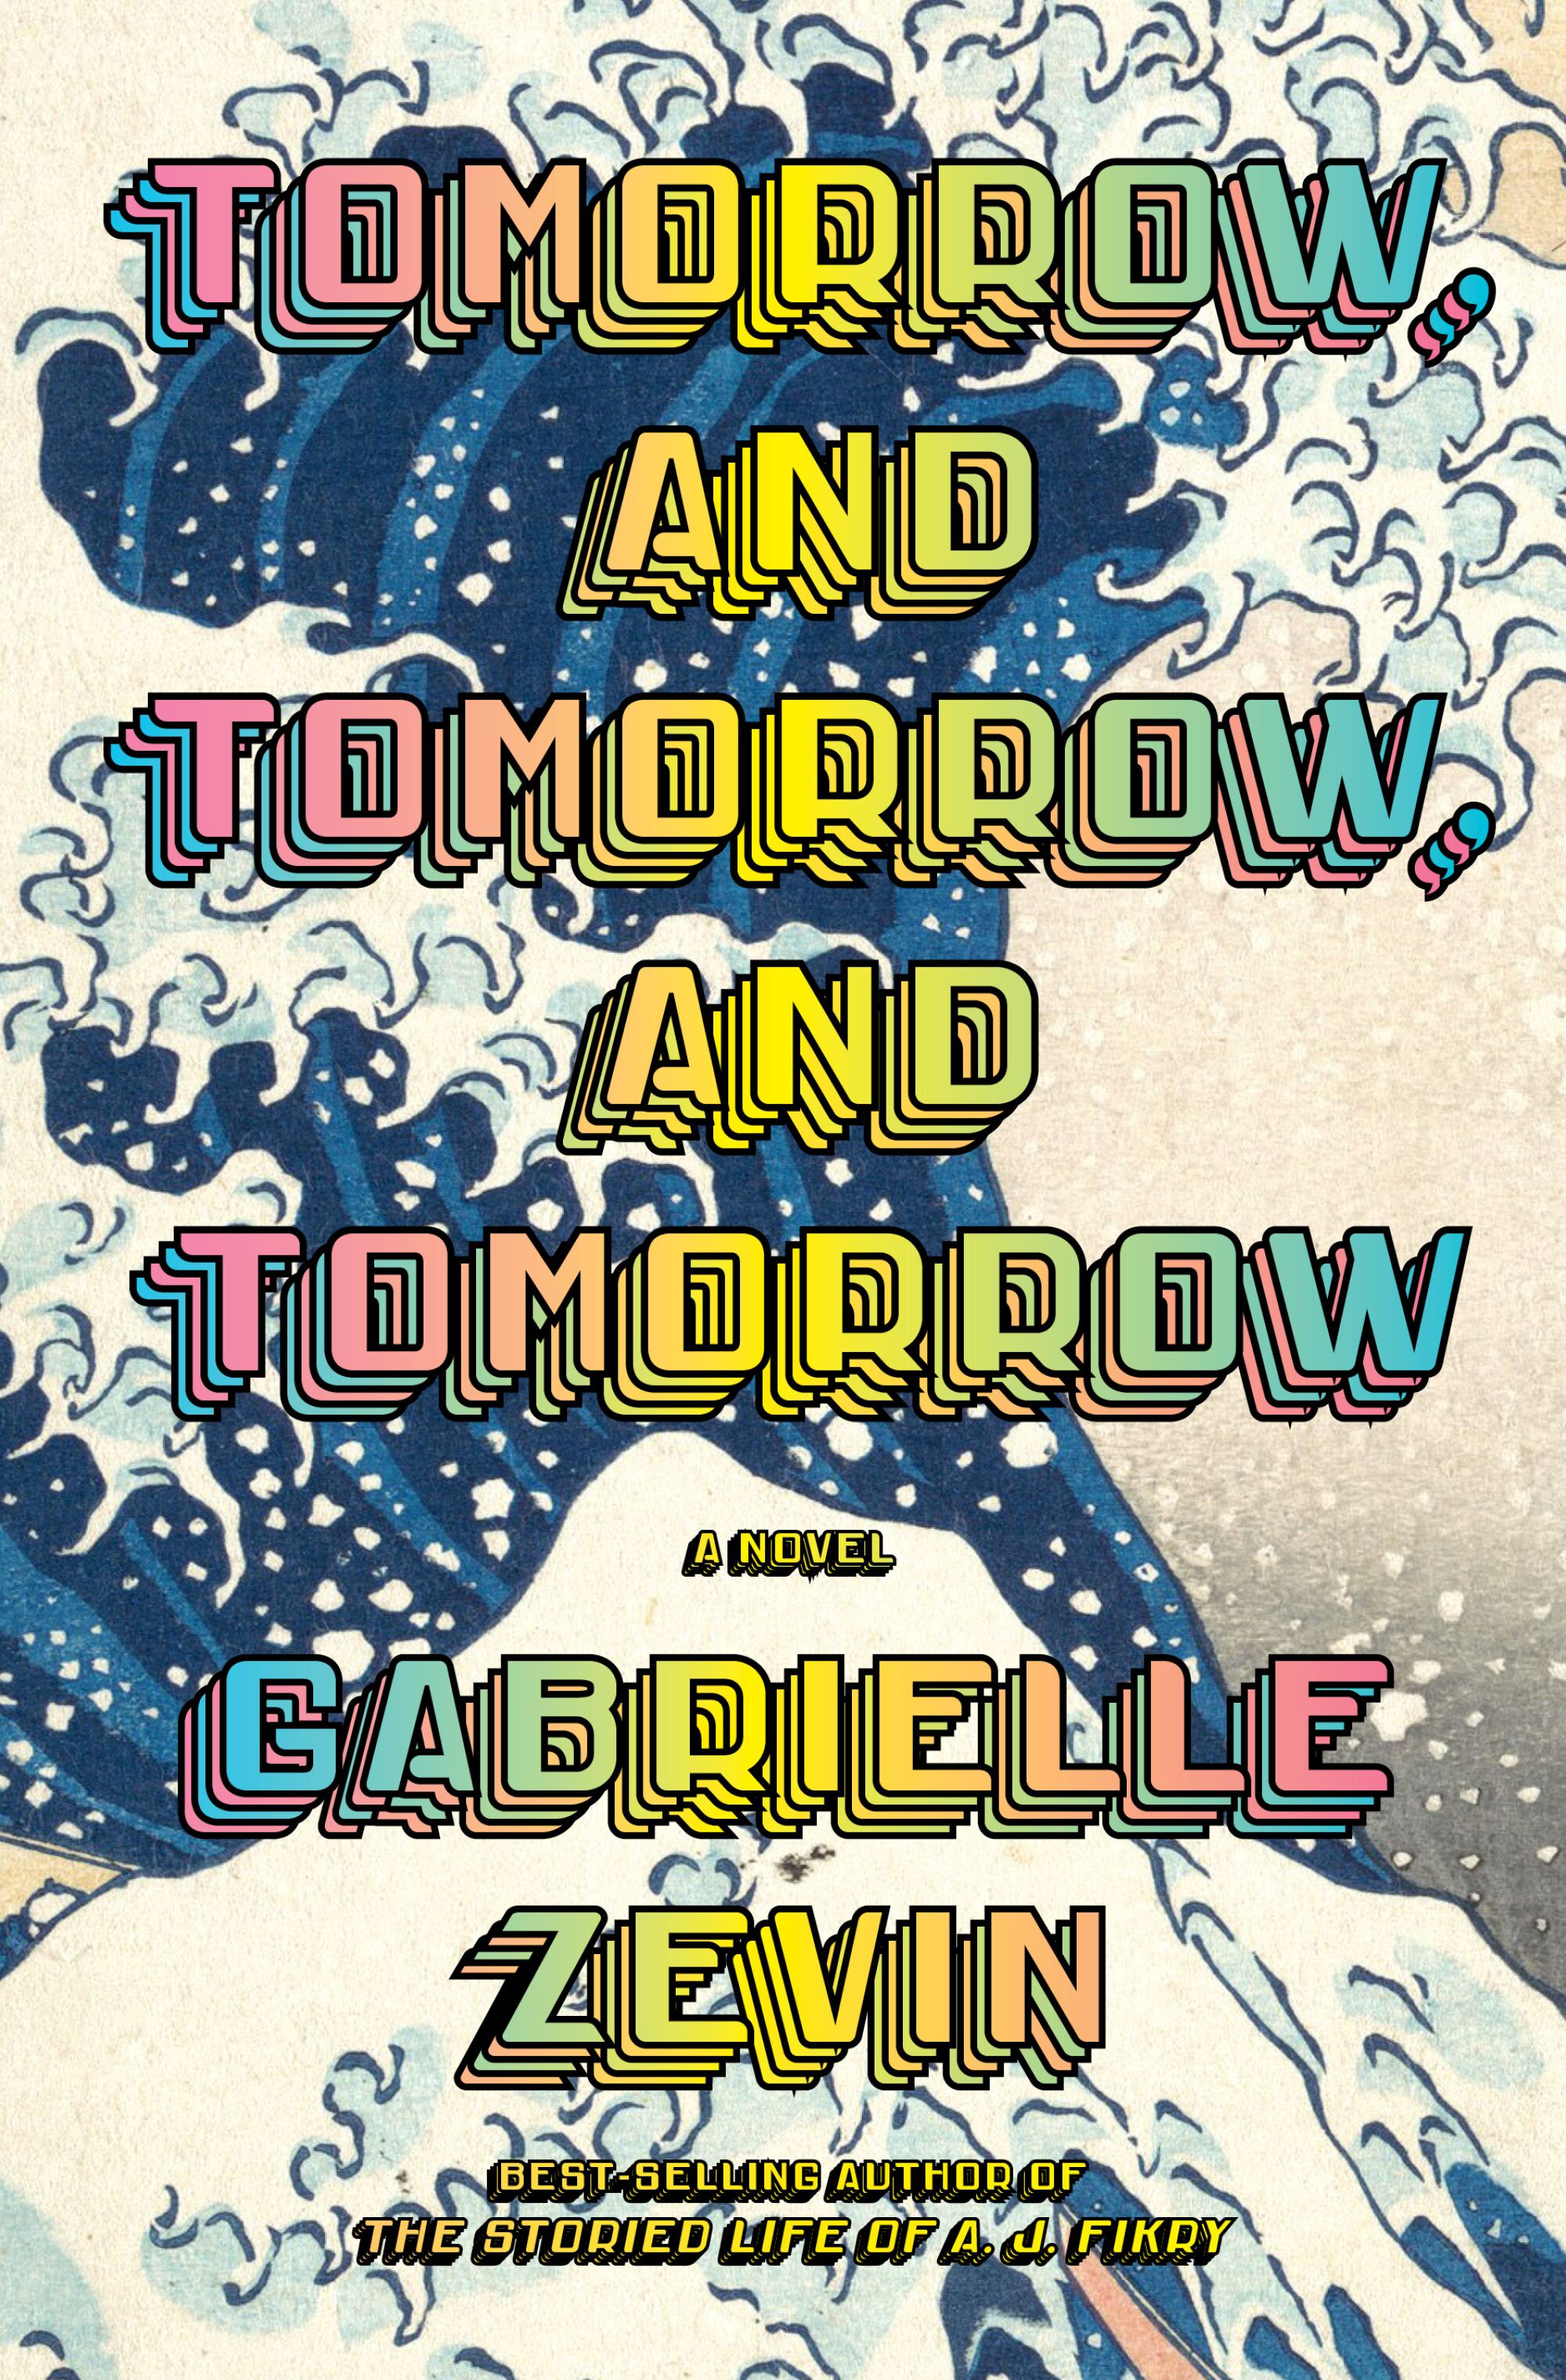 Video-game-like font with wave illustrations on cover of "Tomorrow, and Tomorrow, and Tomorrow," by Gabrielle Zevin